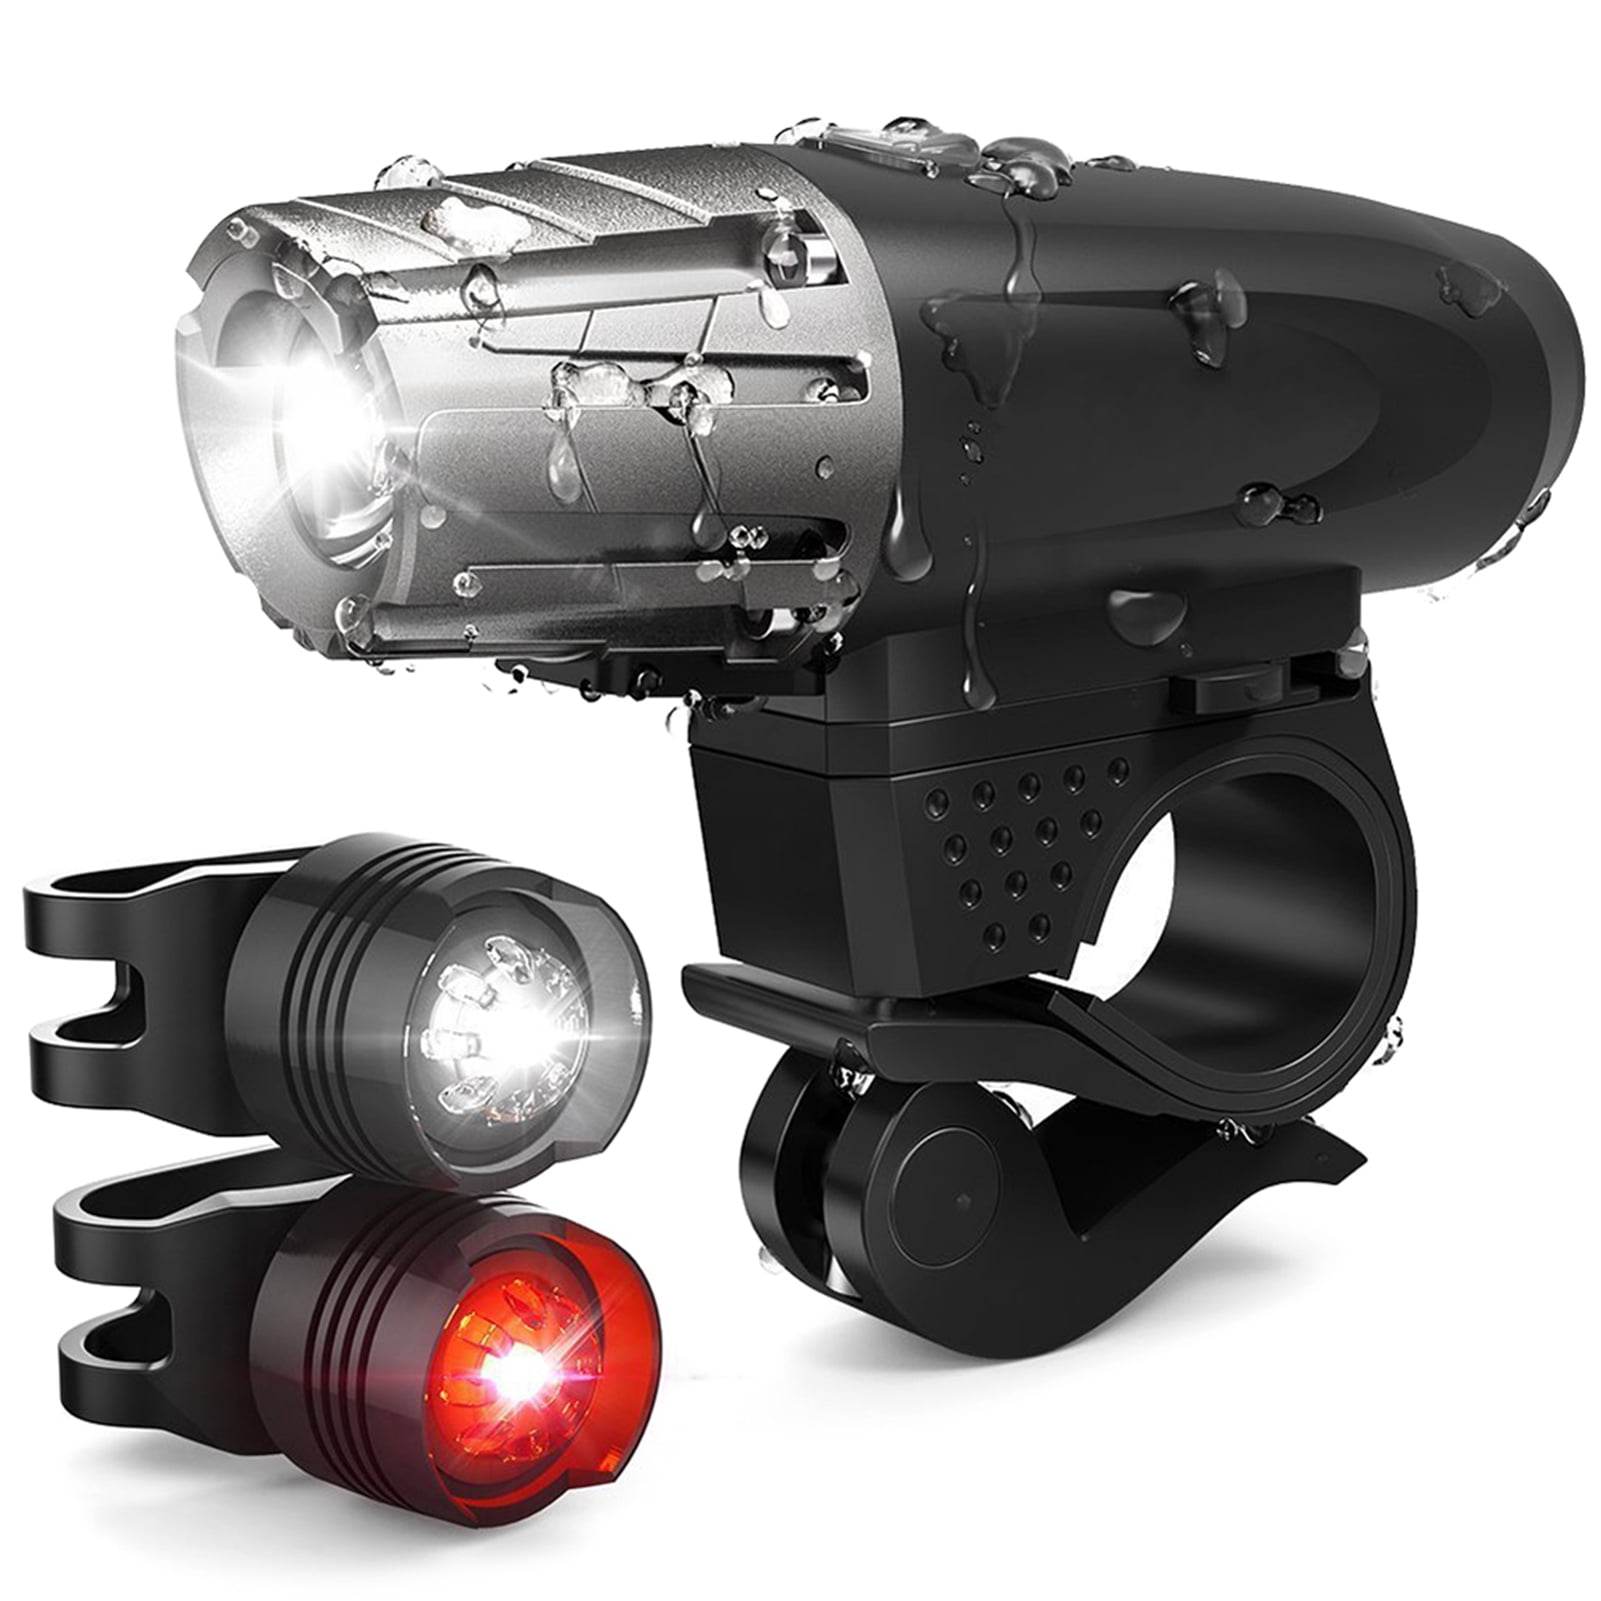 Bicycle Headlight Bike Front Light USB Rechargeable Double LED Bike Accessory 